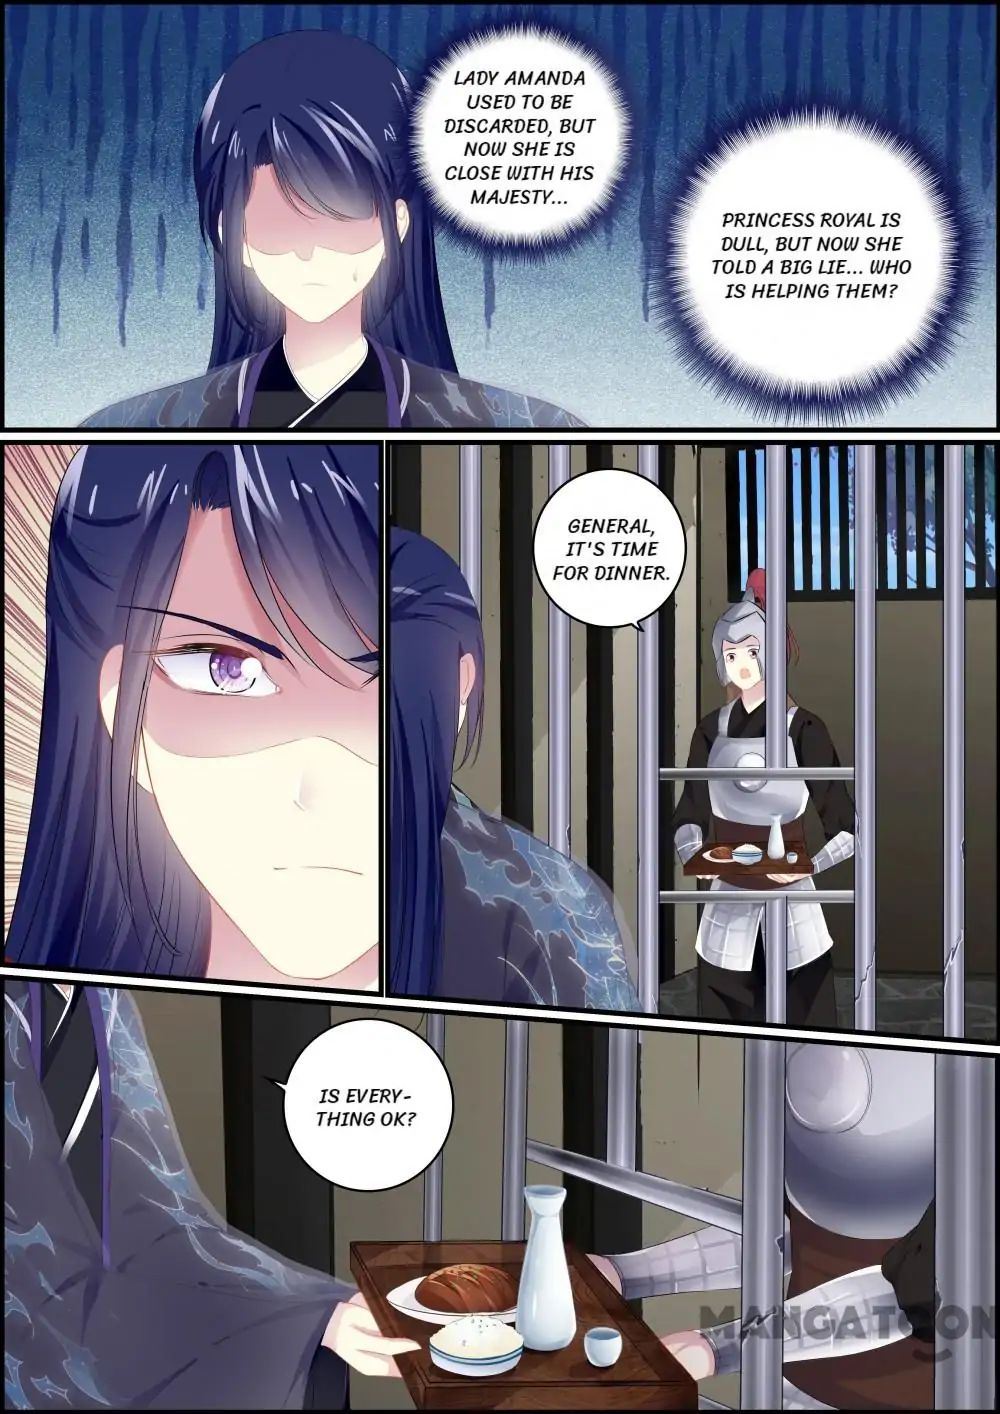 Chasing Star Moon - chapter 105 - #4